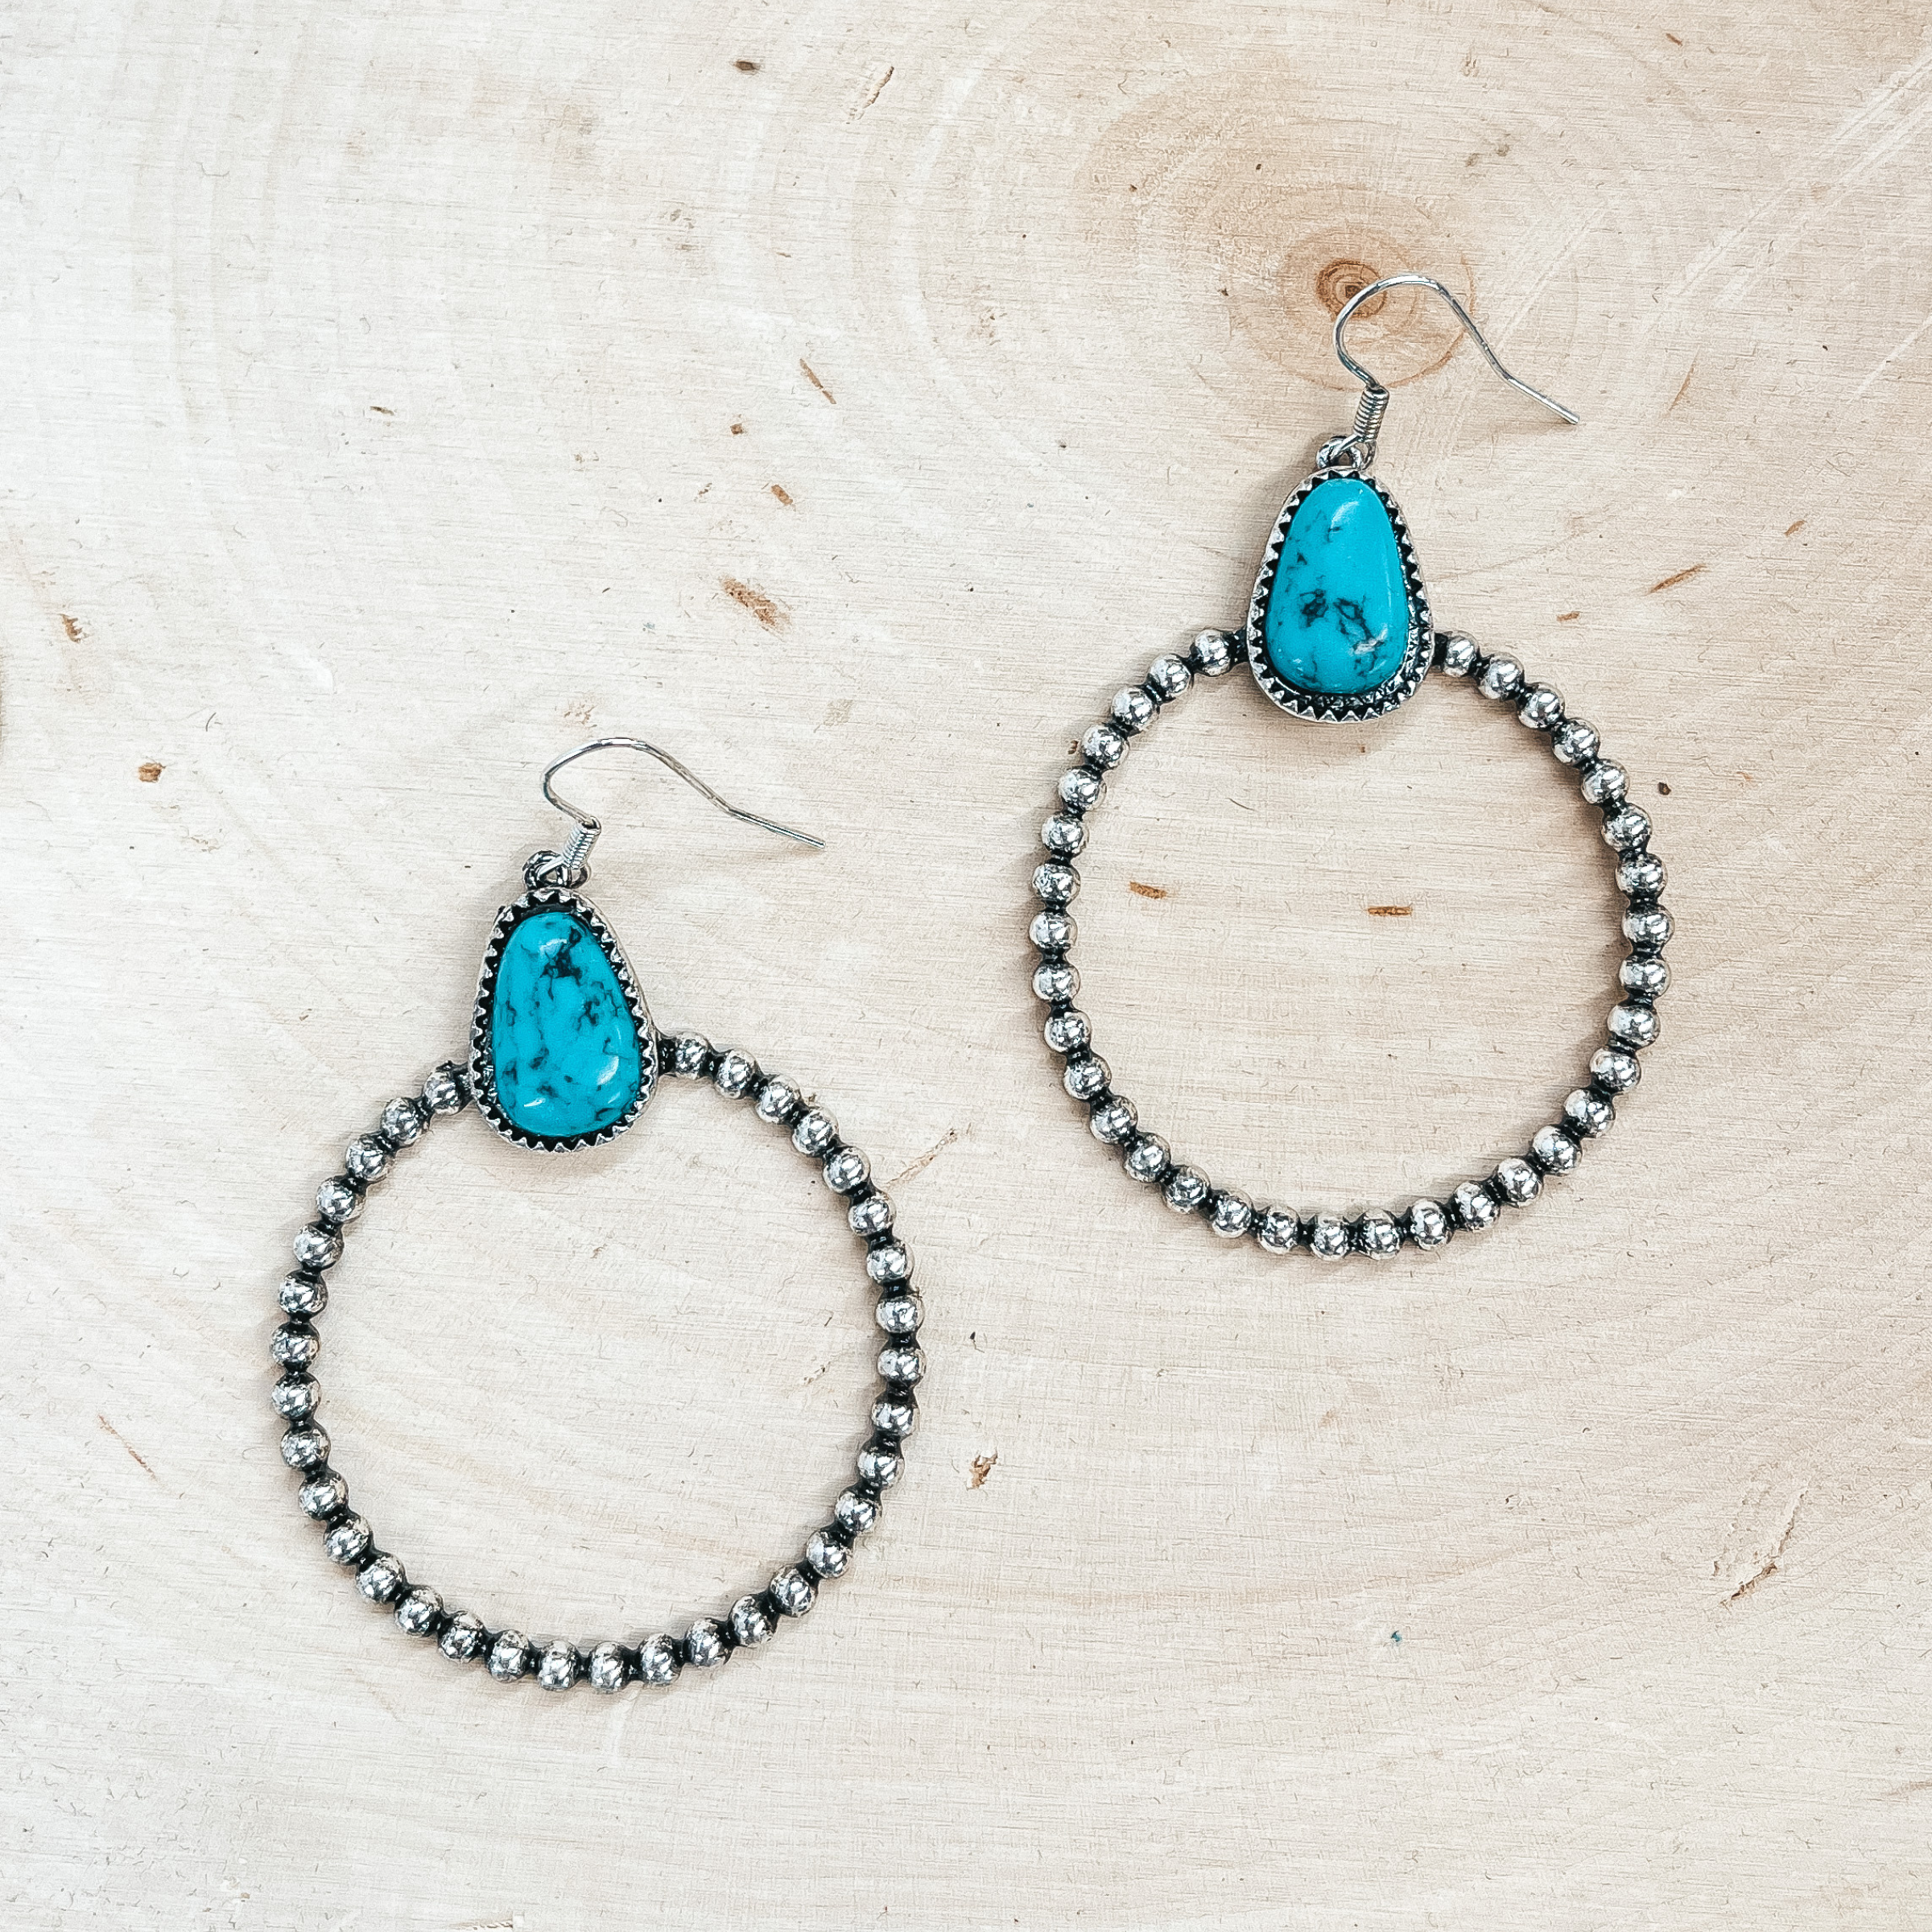 These are silver fish hook earrings with a faux  turquoise stone and a silver beaded circle drop. The circle drop has a beaded texture in the front  and a smooth back. These earrings are taken on a  slab of wood.